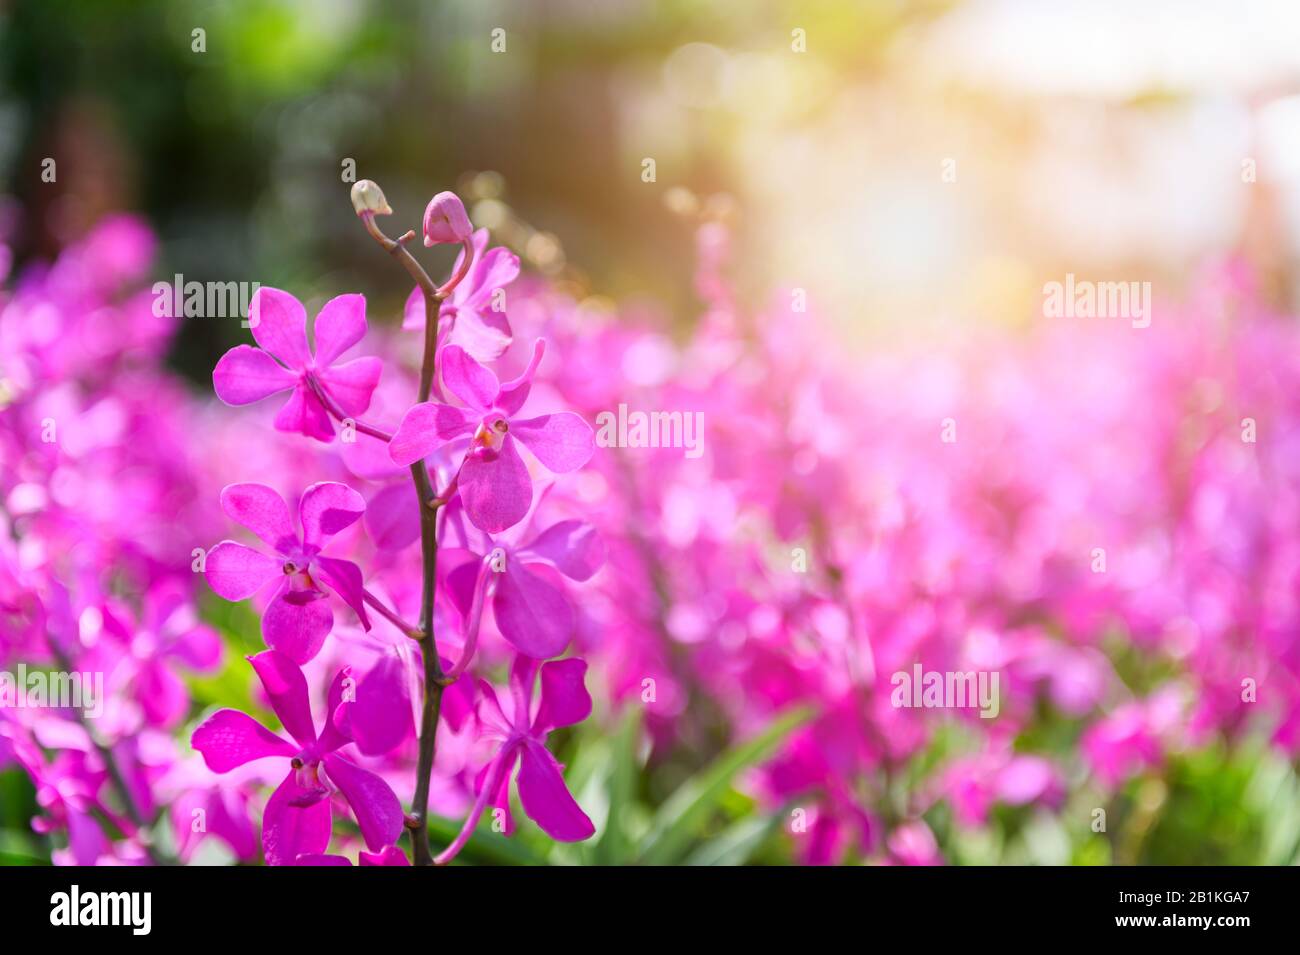 Ascocenda orchid Beautiful pink flowers blooming in garden. pretty blooming tropical plants. Colorful petals, nature background Stock Photo